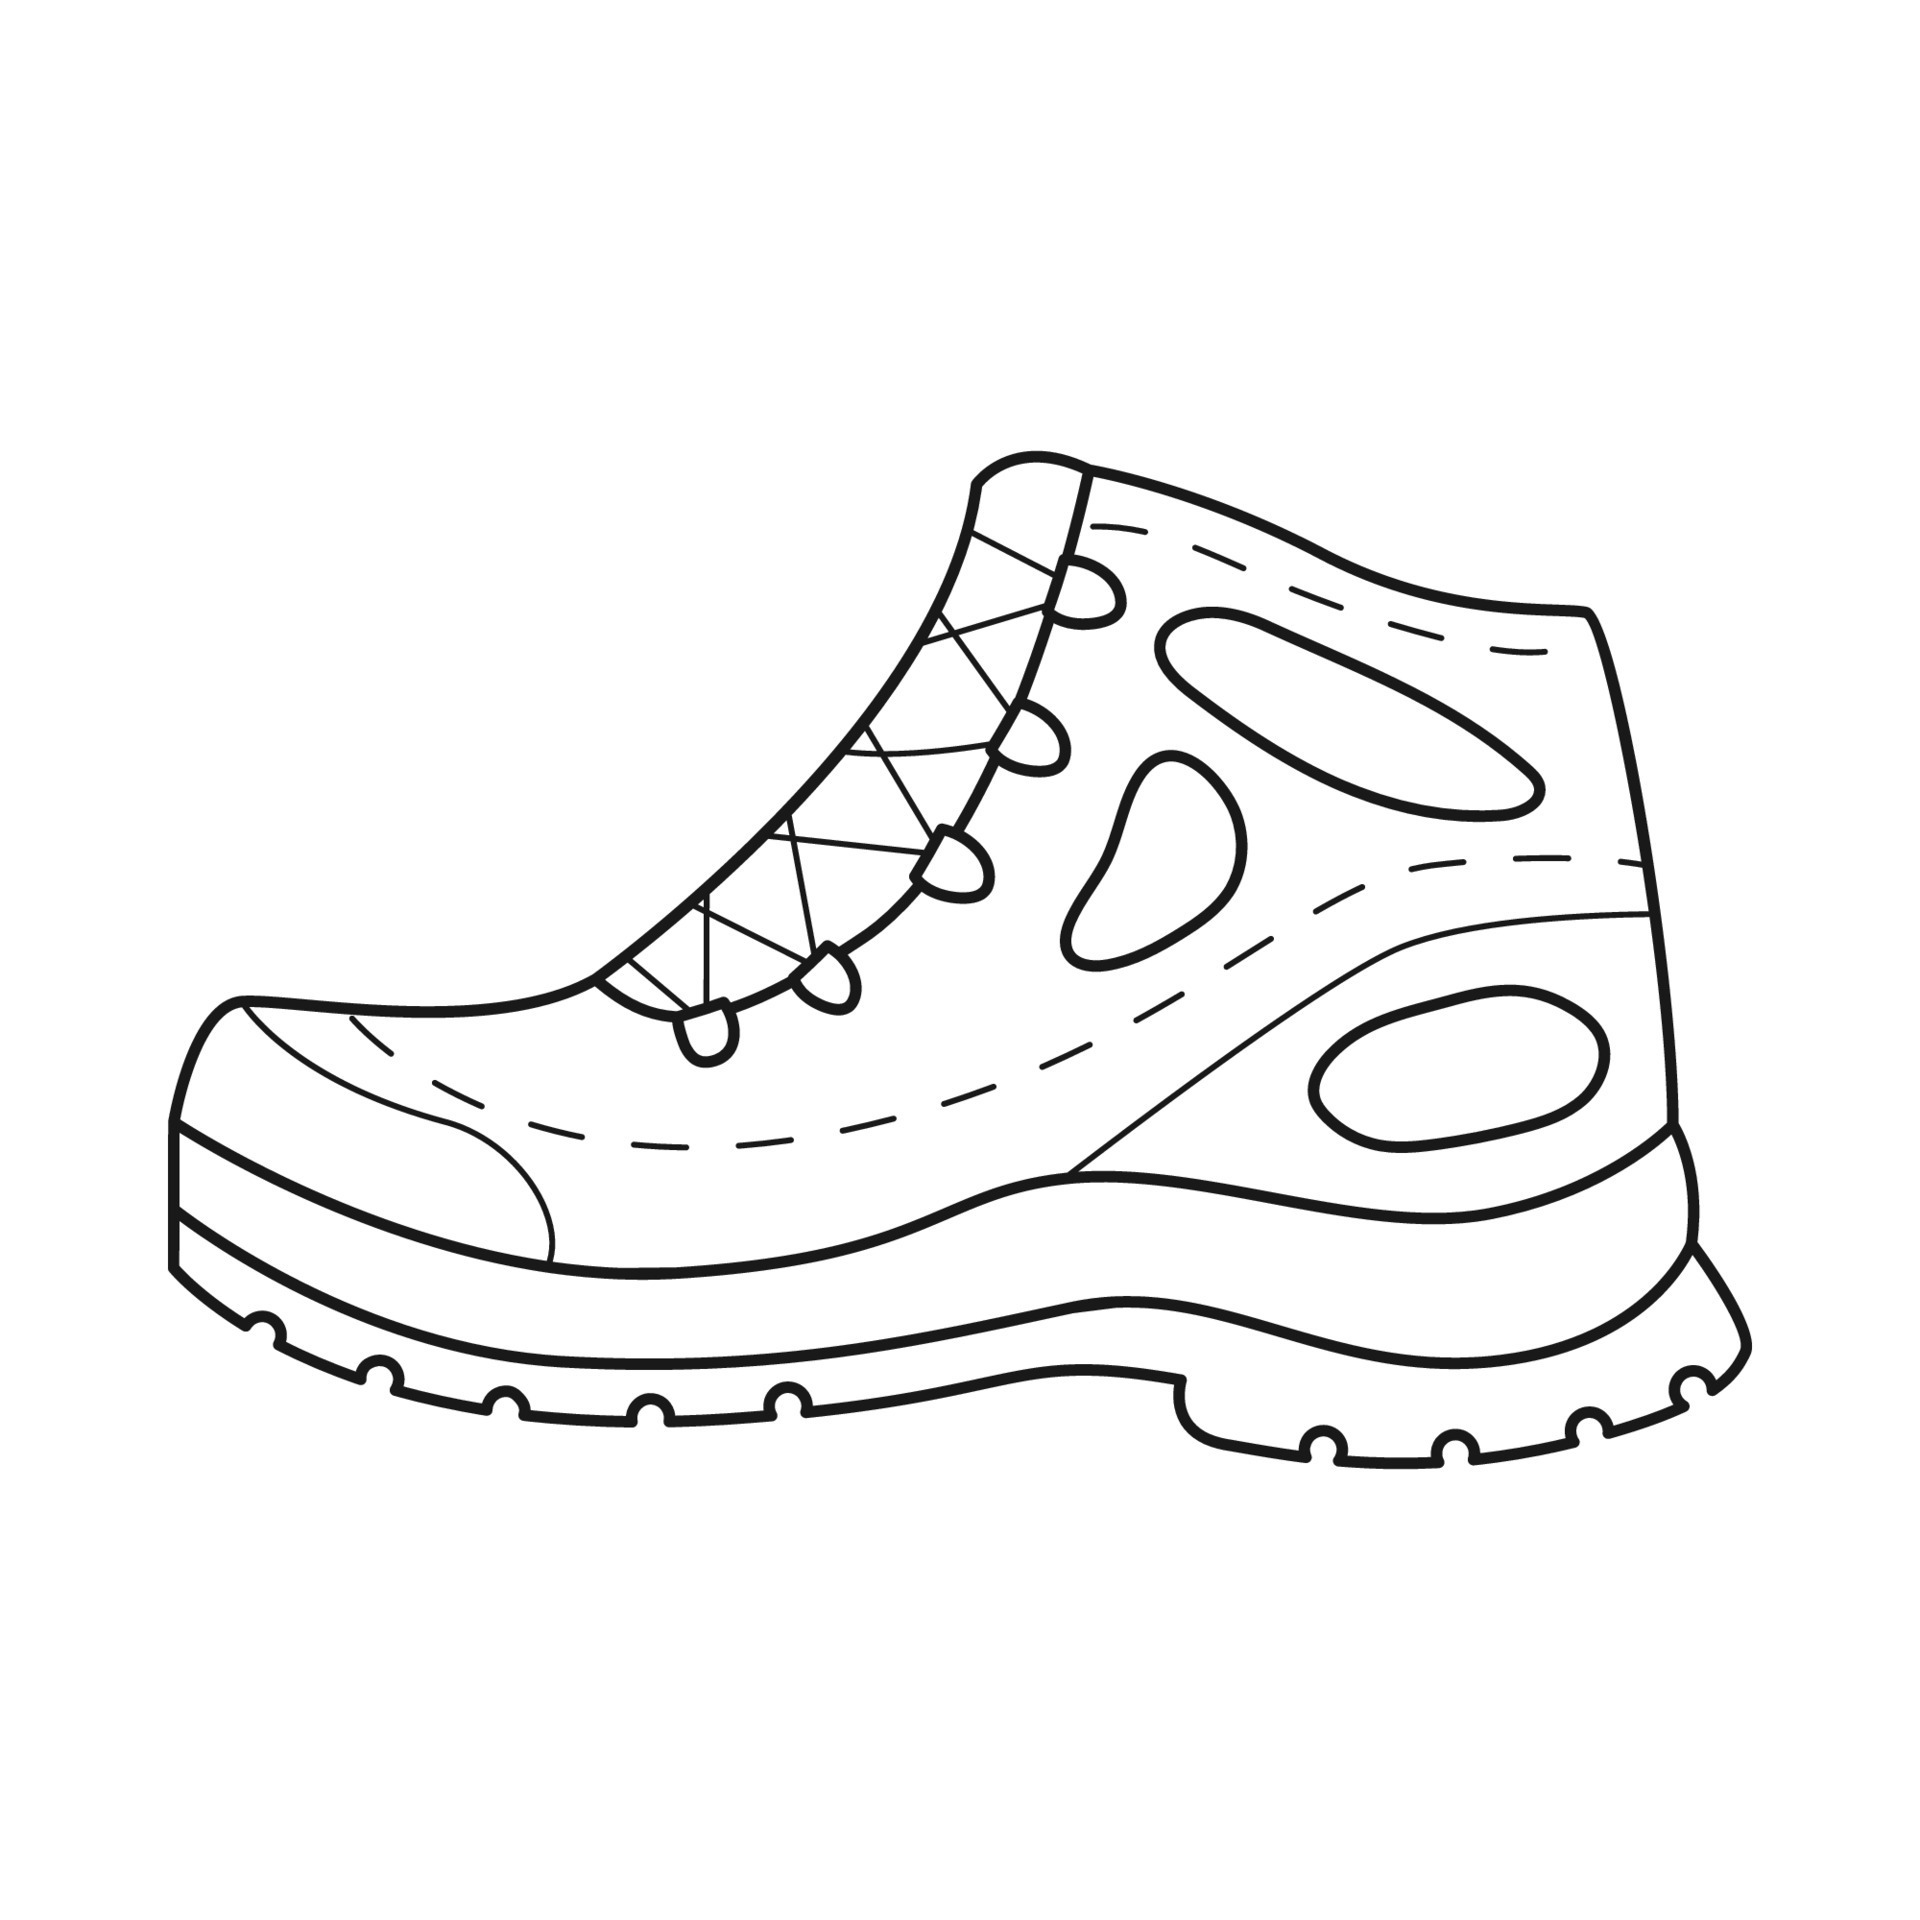 Doodle Hiking shoes. A blue shoe for tourist trips with a special tread ...